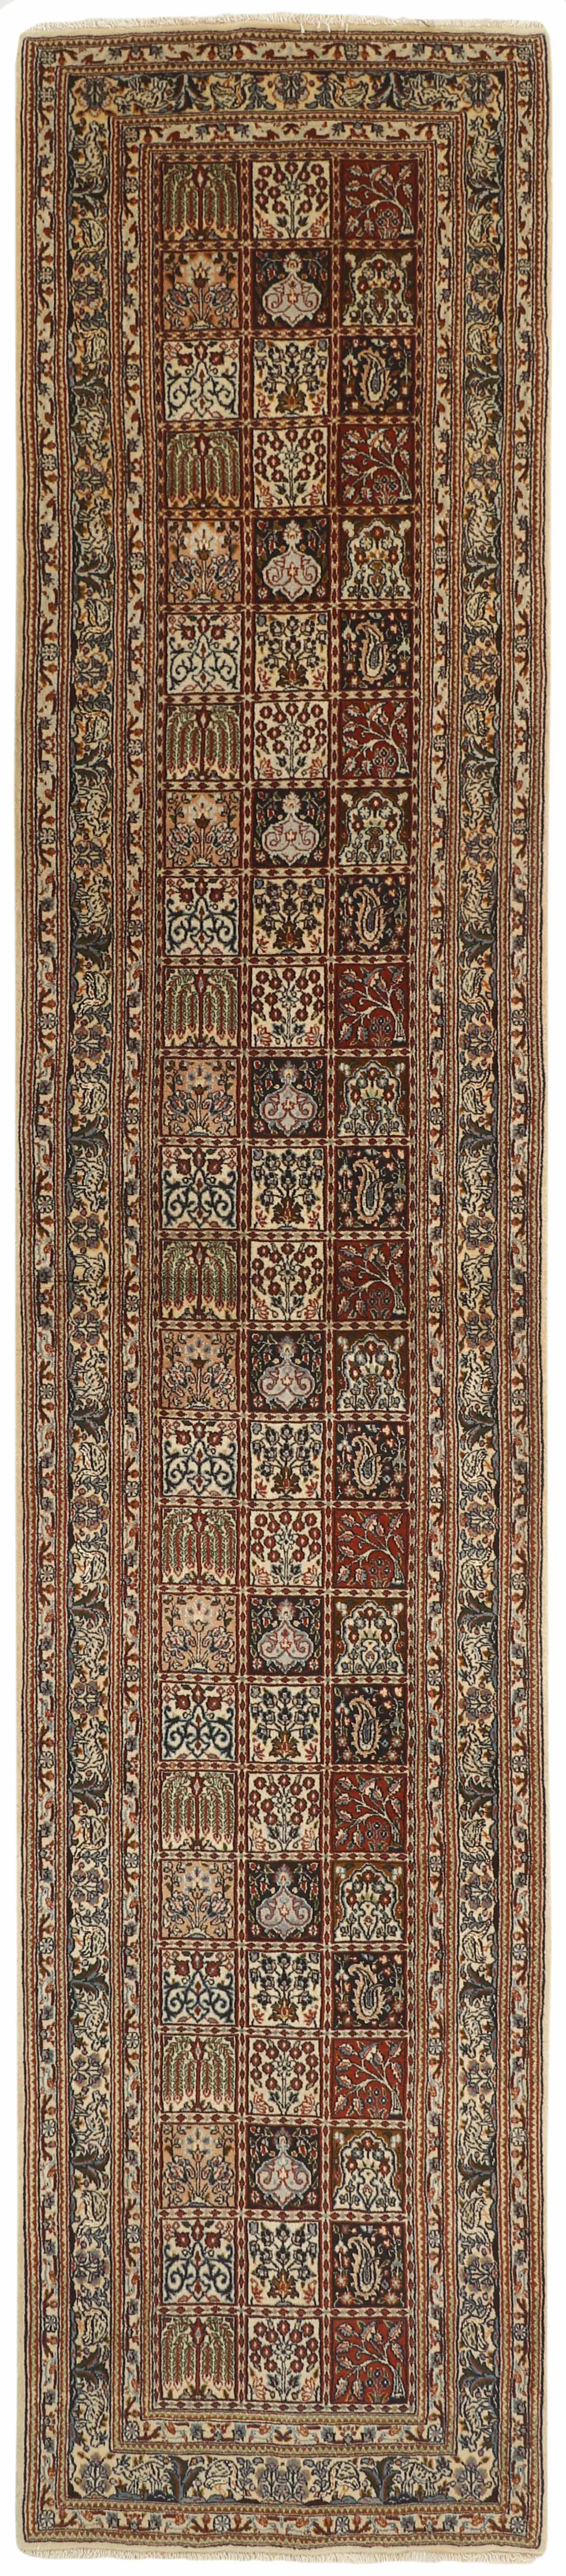 authentic persian runner with floral pattern in beige, grey and red